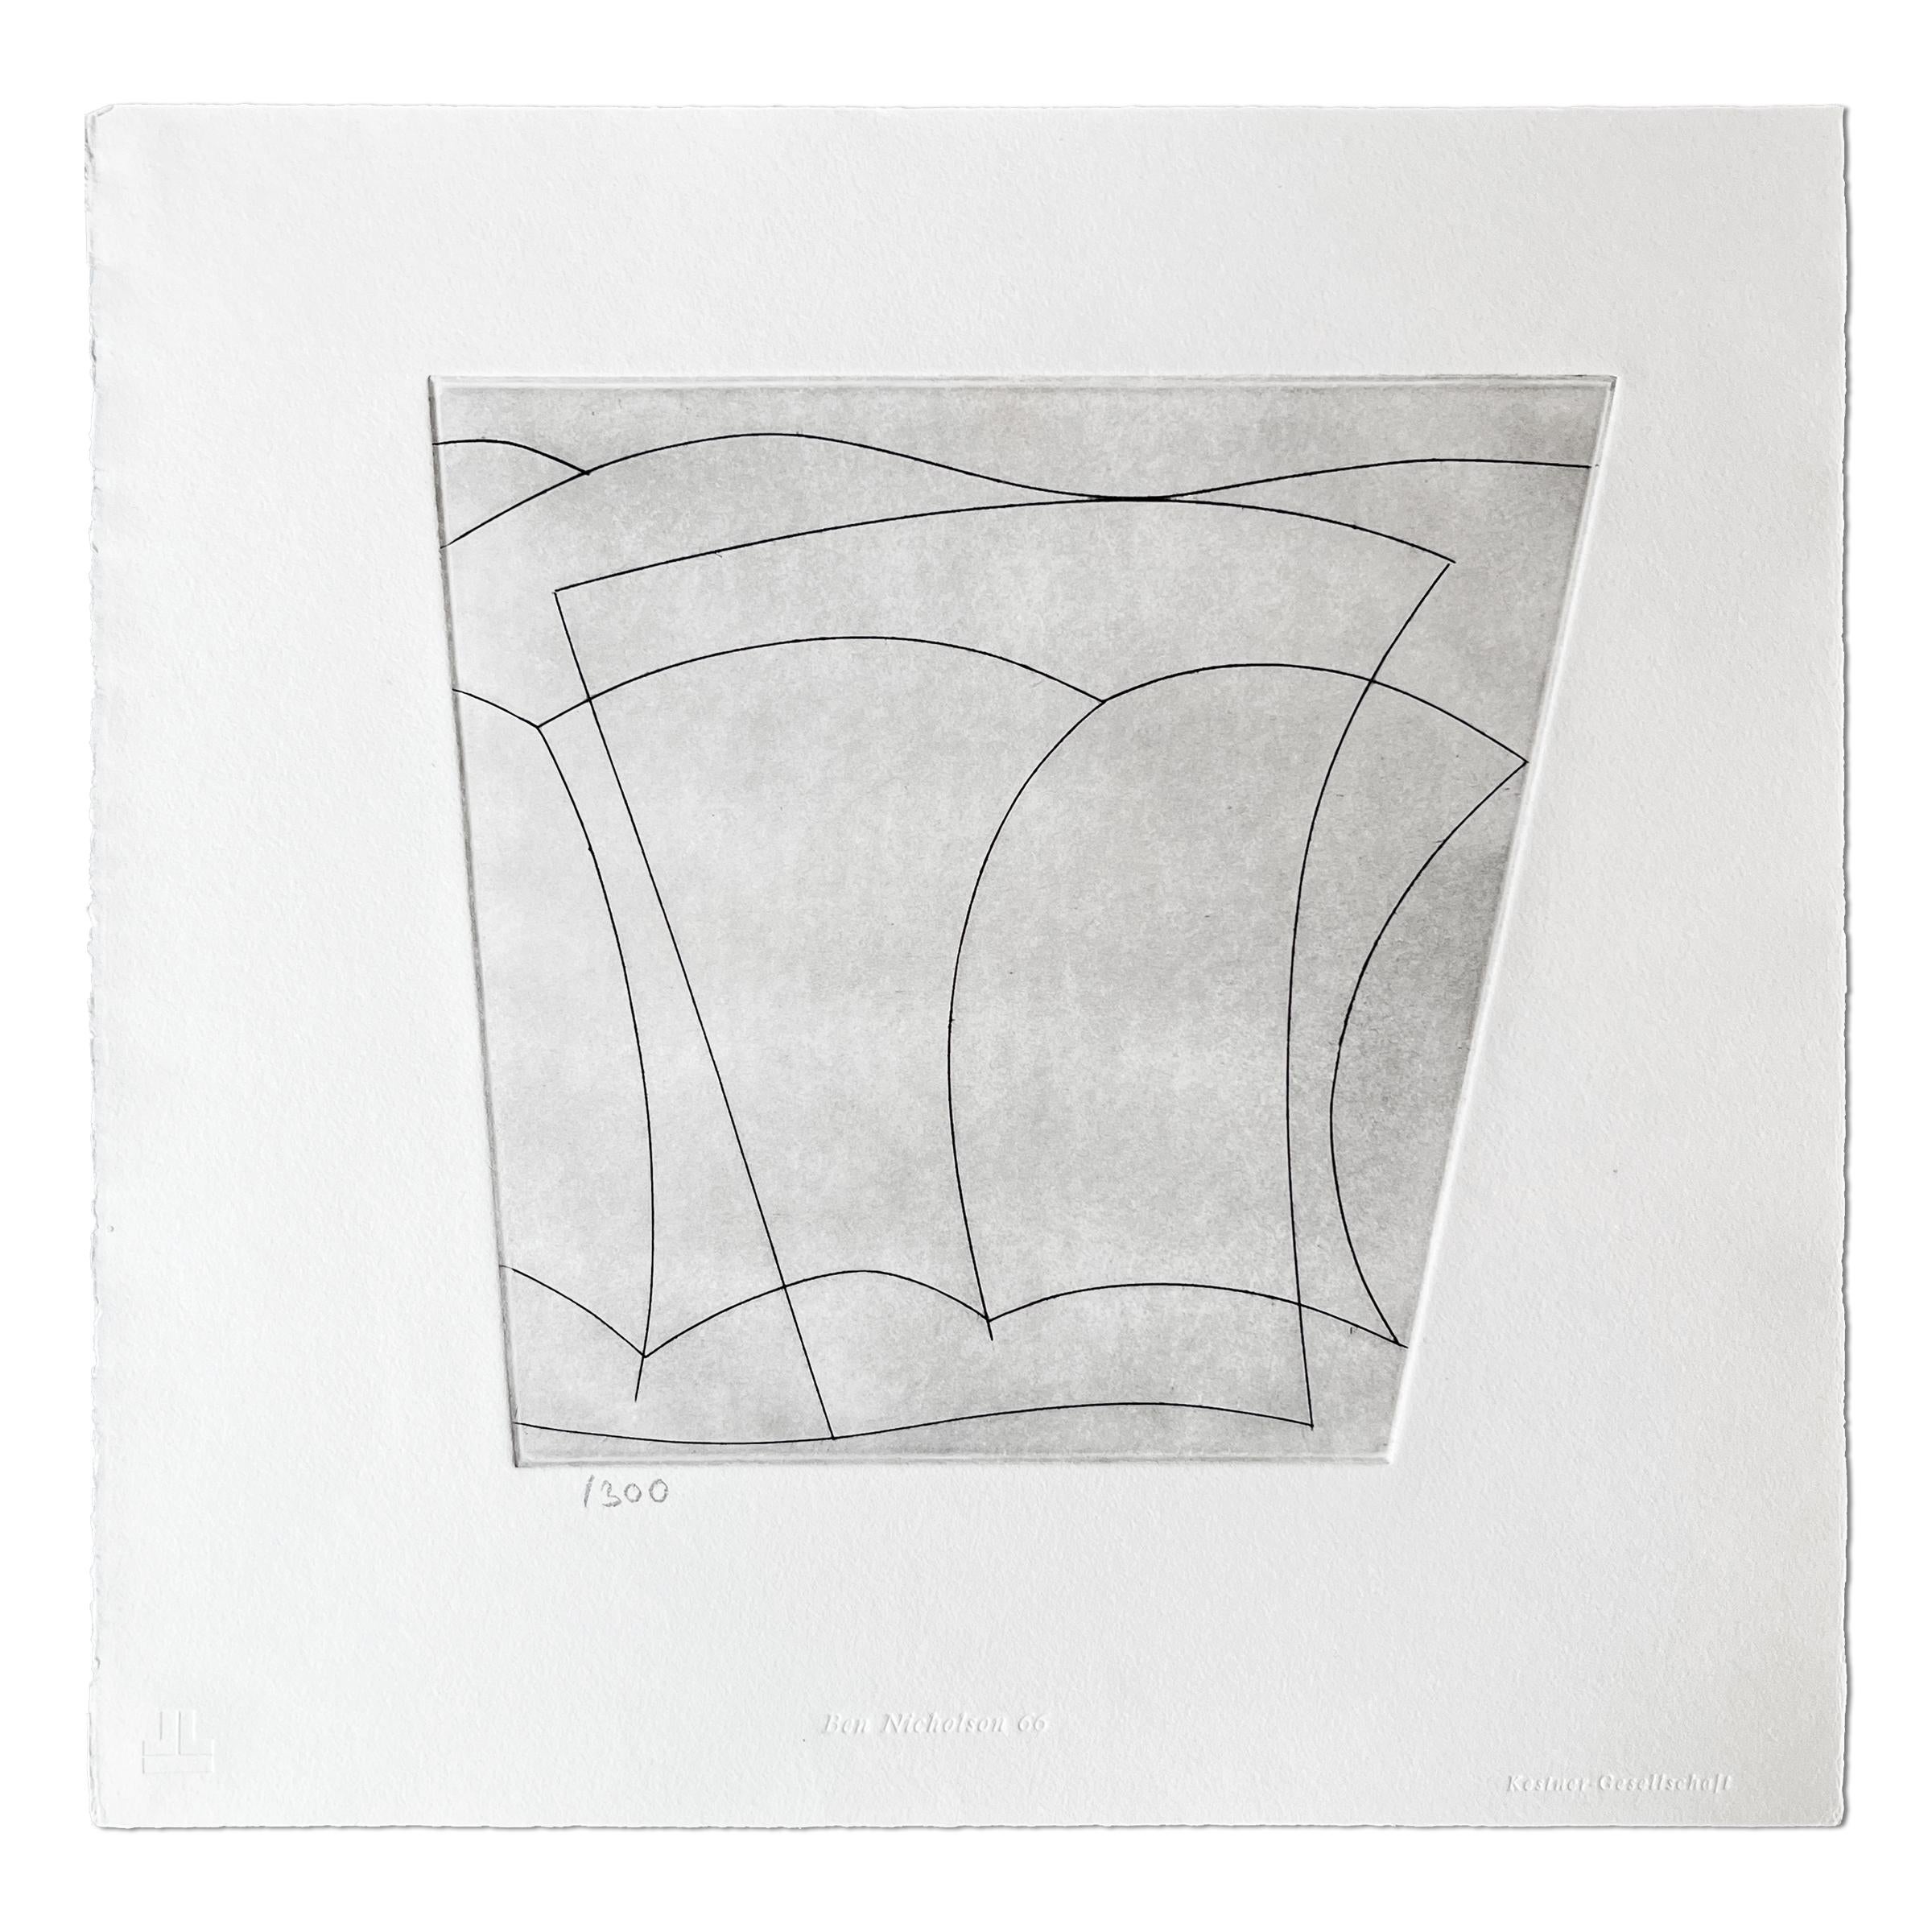 Ben Nicholson (British, 1894-1982)
Forms in Landscape, 1966
medium: Etching on wove paper
Dimensions: 12 2/5 × 12 7/10 in  31.6 × 32.2 cm
Edition of 300: Numbered in pencil, not signed
Condition: Very good